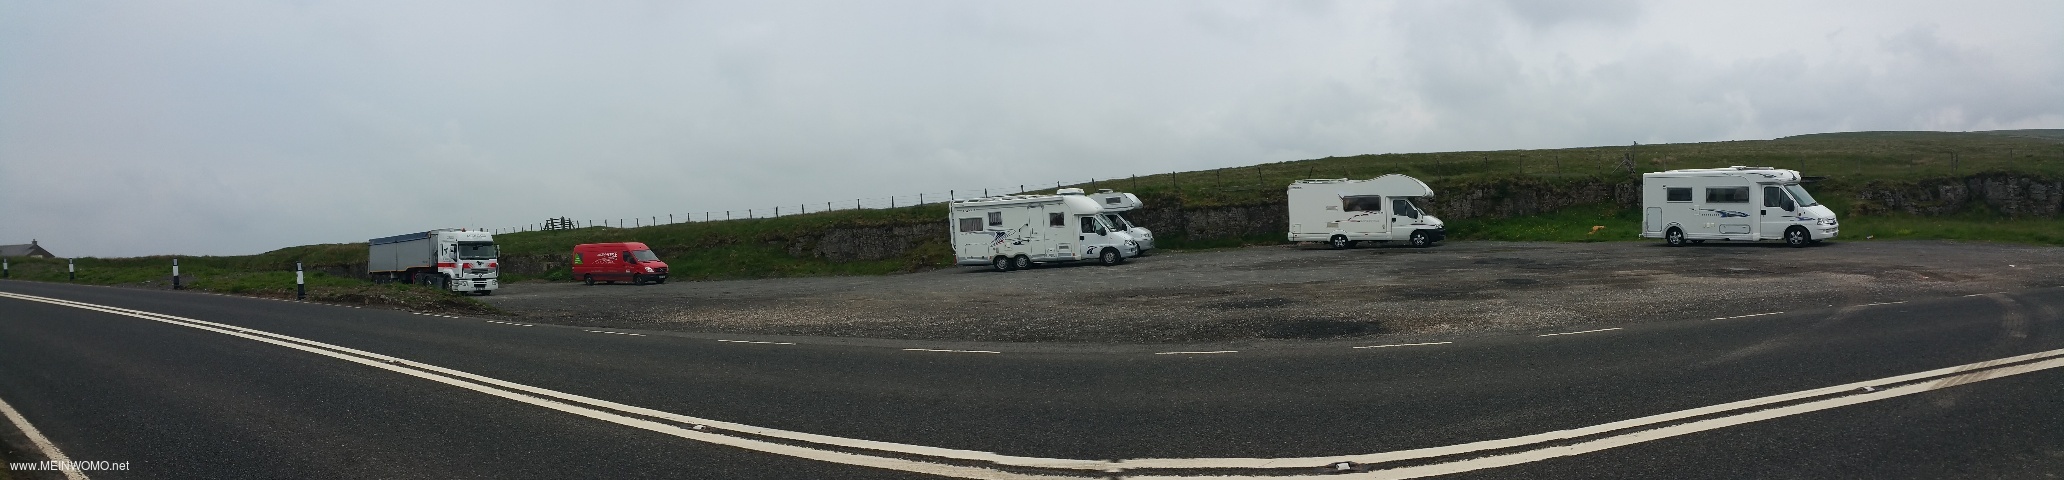  Parking and overnight accommodation on the A 686 between Penrith and Alston.